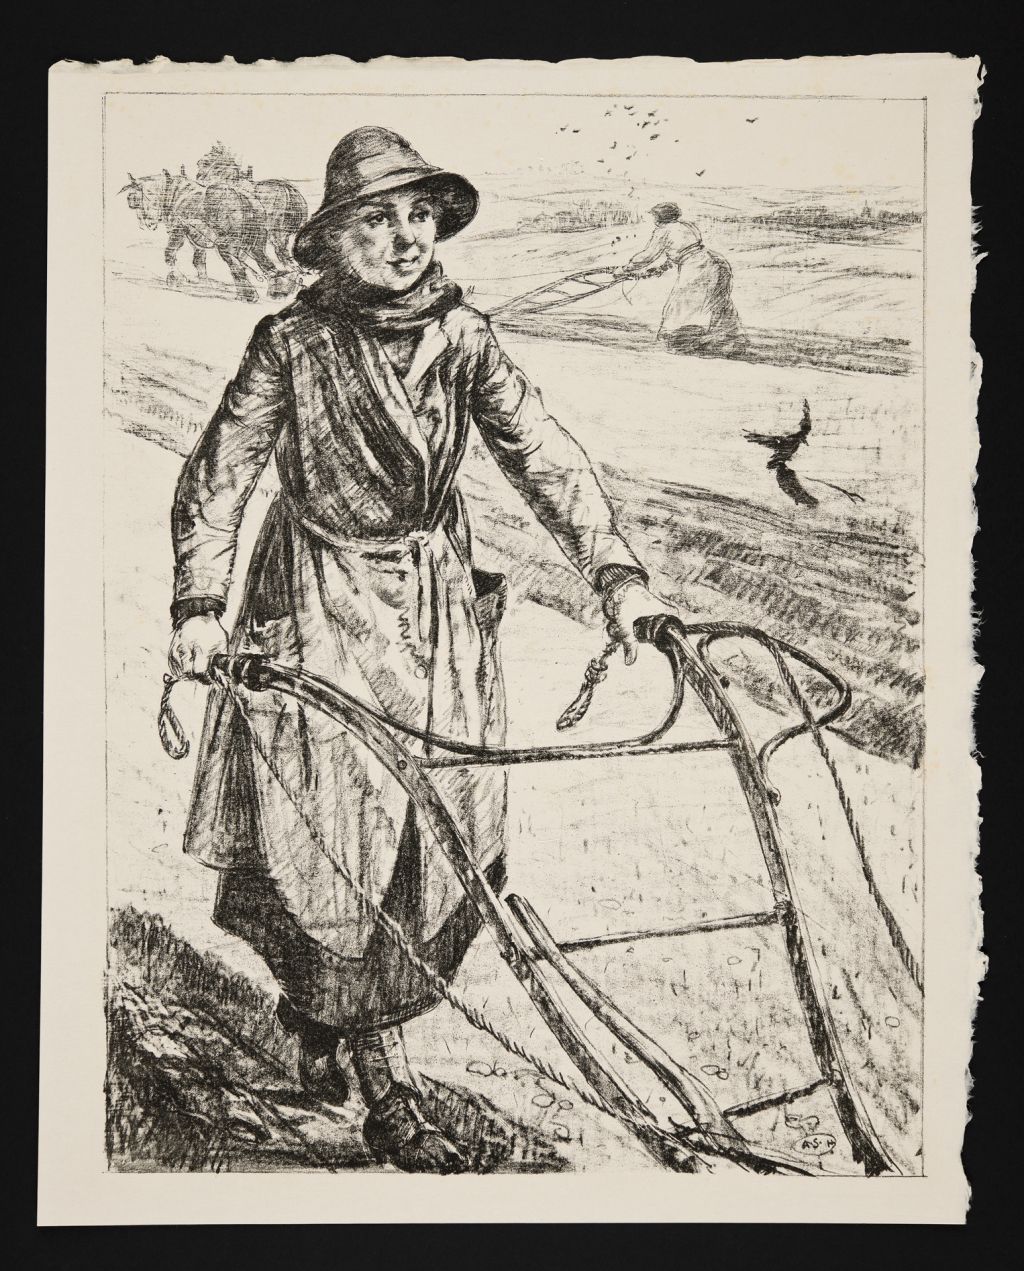 On the Land: Ploughing - A. S. Hartrick